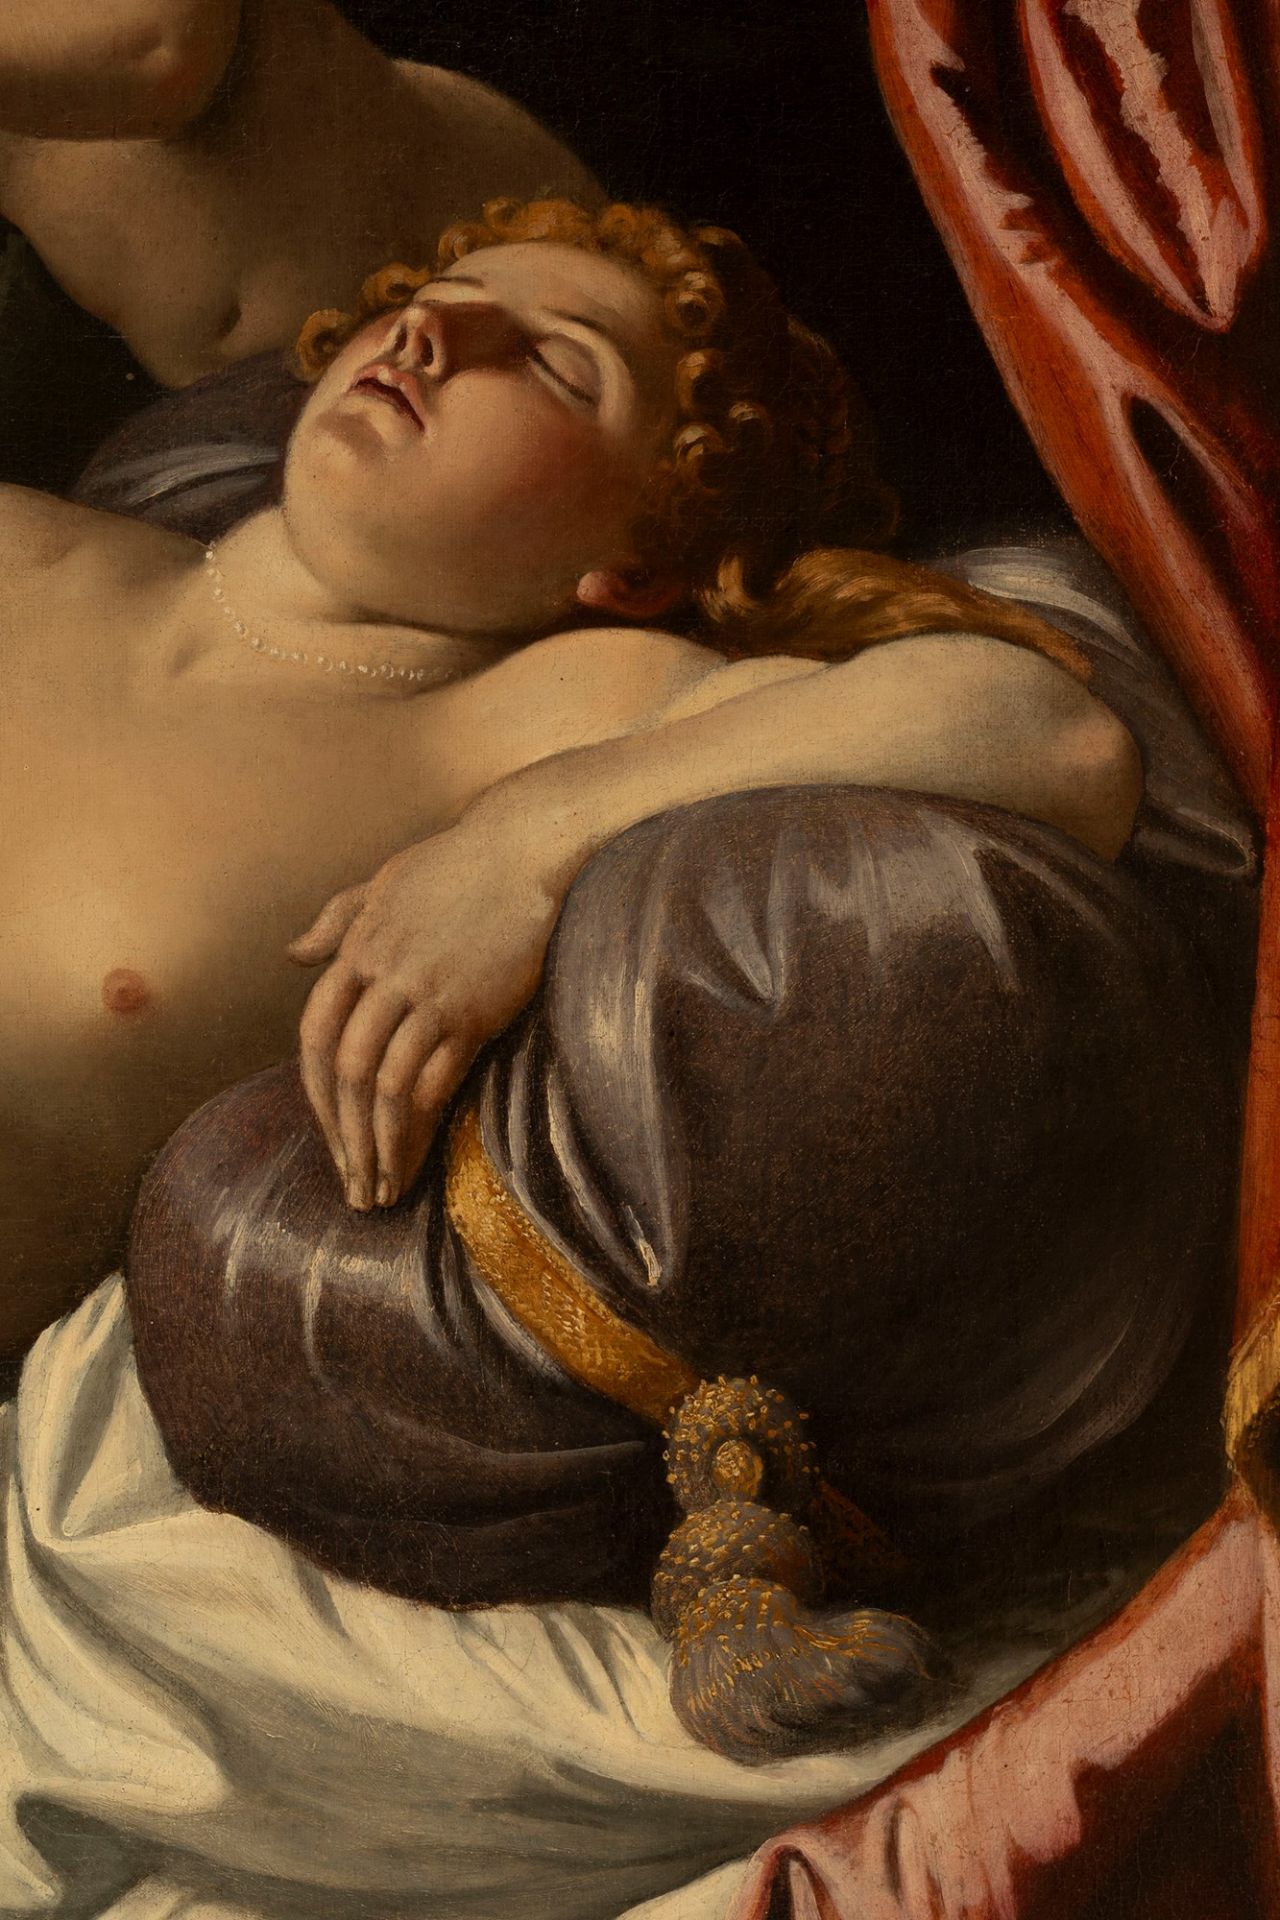 Attributed to Giovanni Lanfranco (Parma, 1582 – Rome, 1647) - Sleeping Venus with two cupids - Image 5 of 5